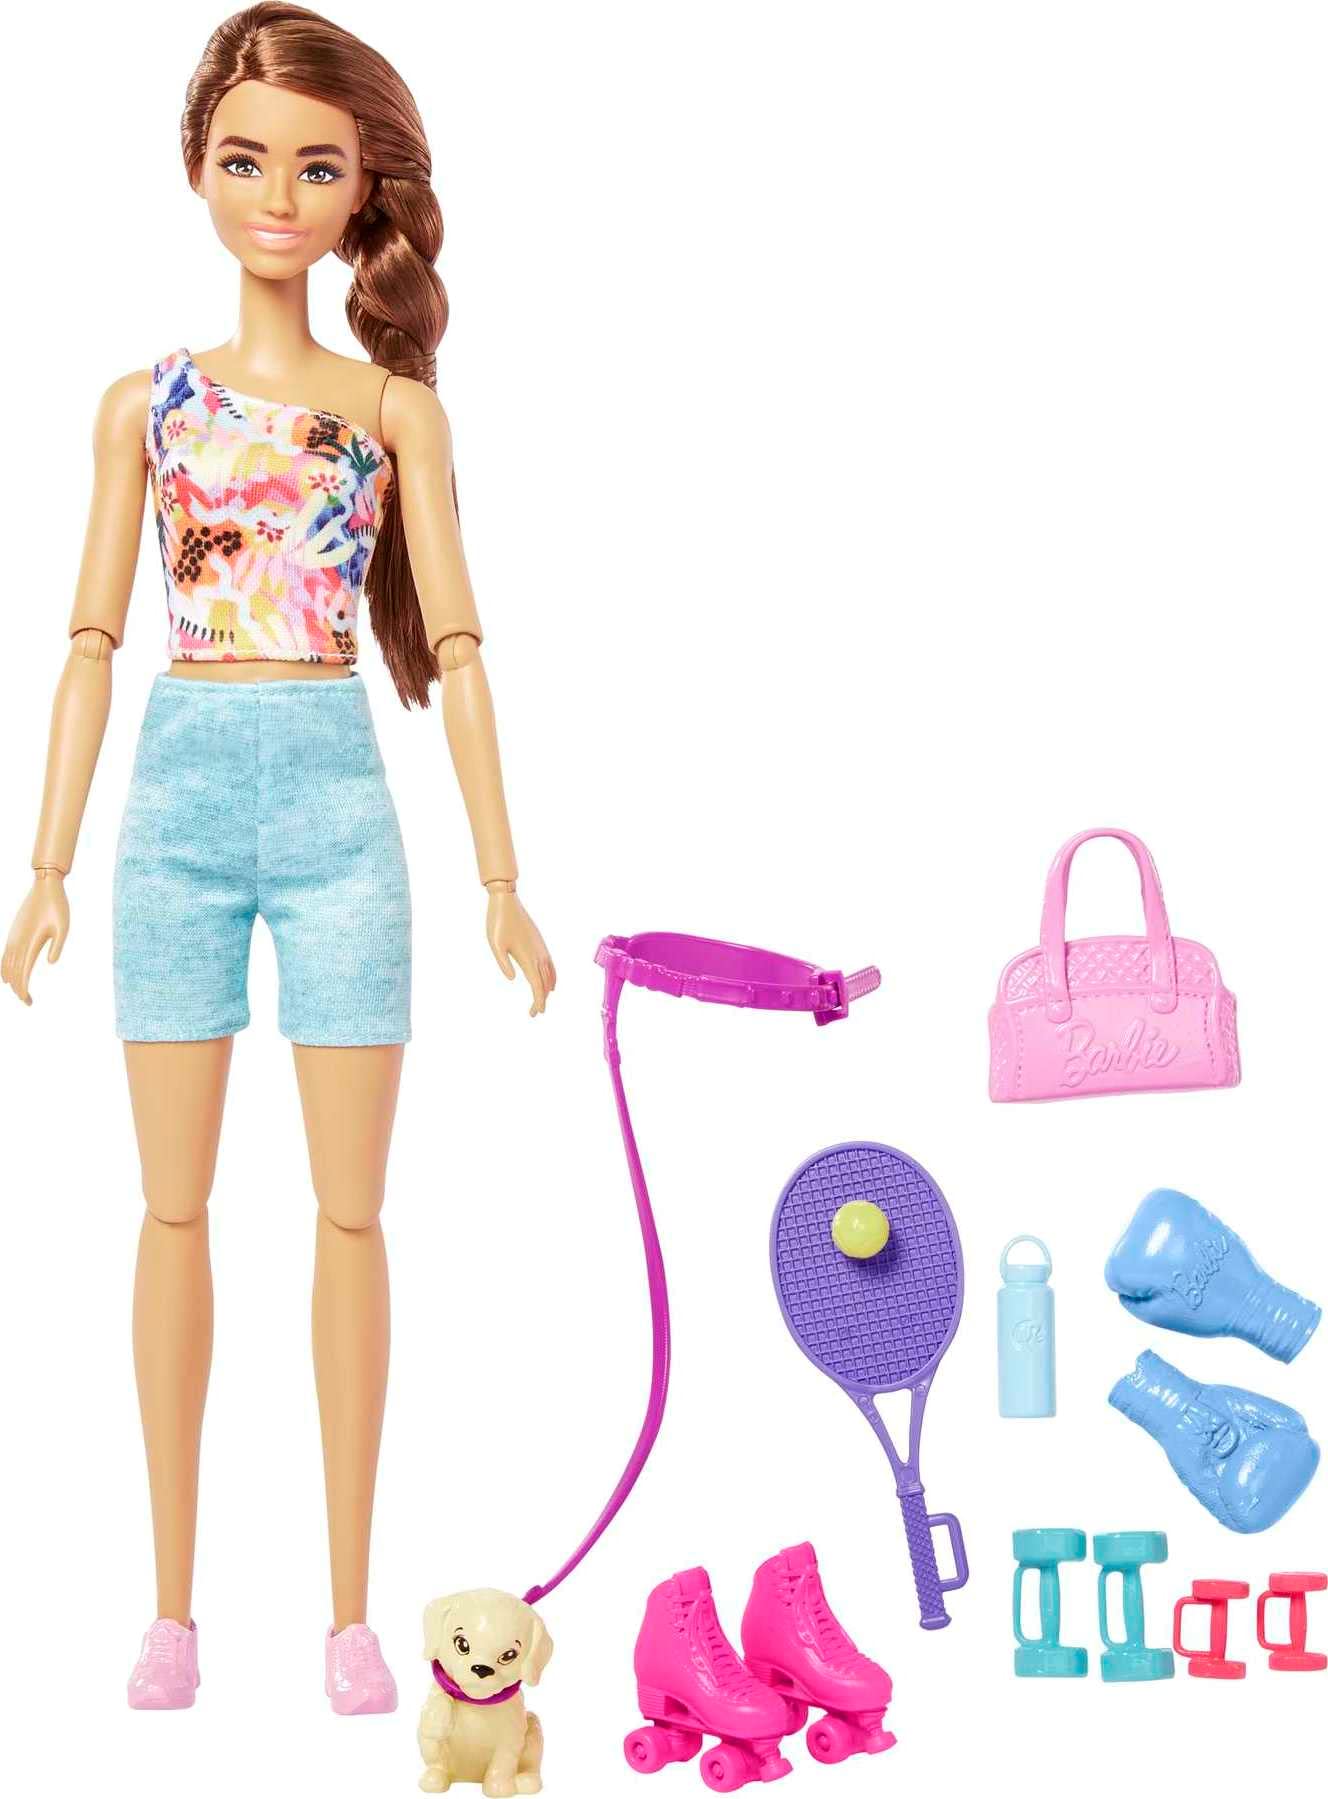 Barbie Self-Care Doll, Brunette Posable Workout Doll with Puppy and Accessories Including Roller Skates & Tennis Rackets